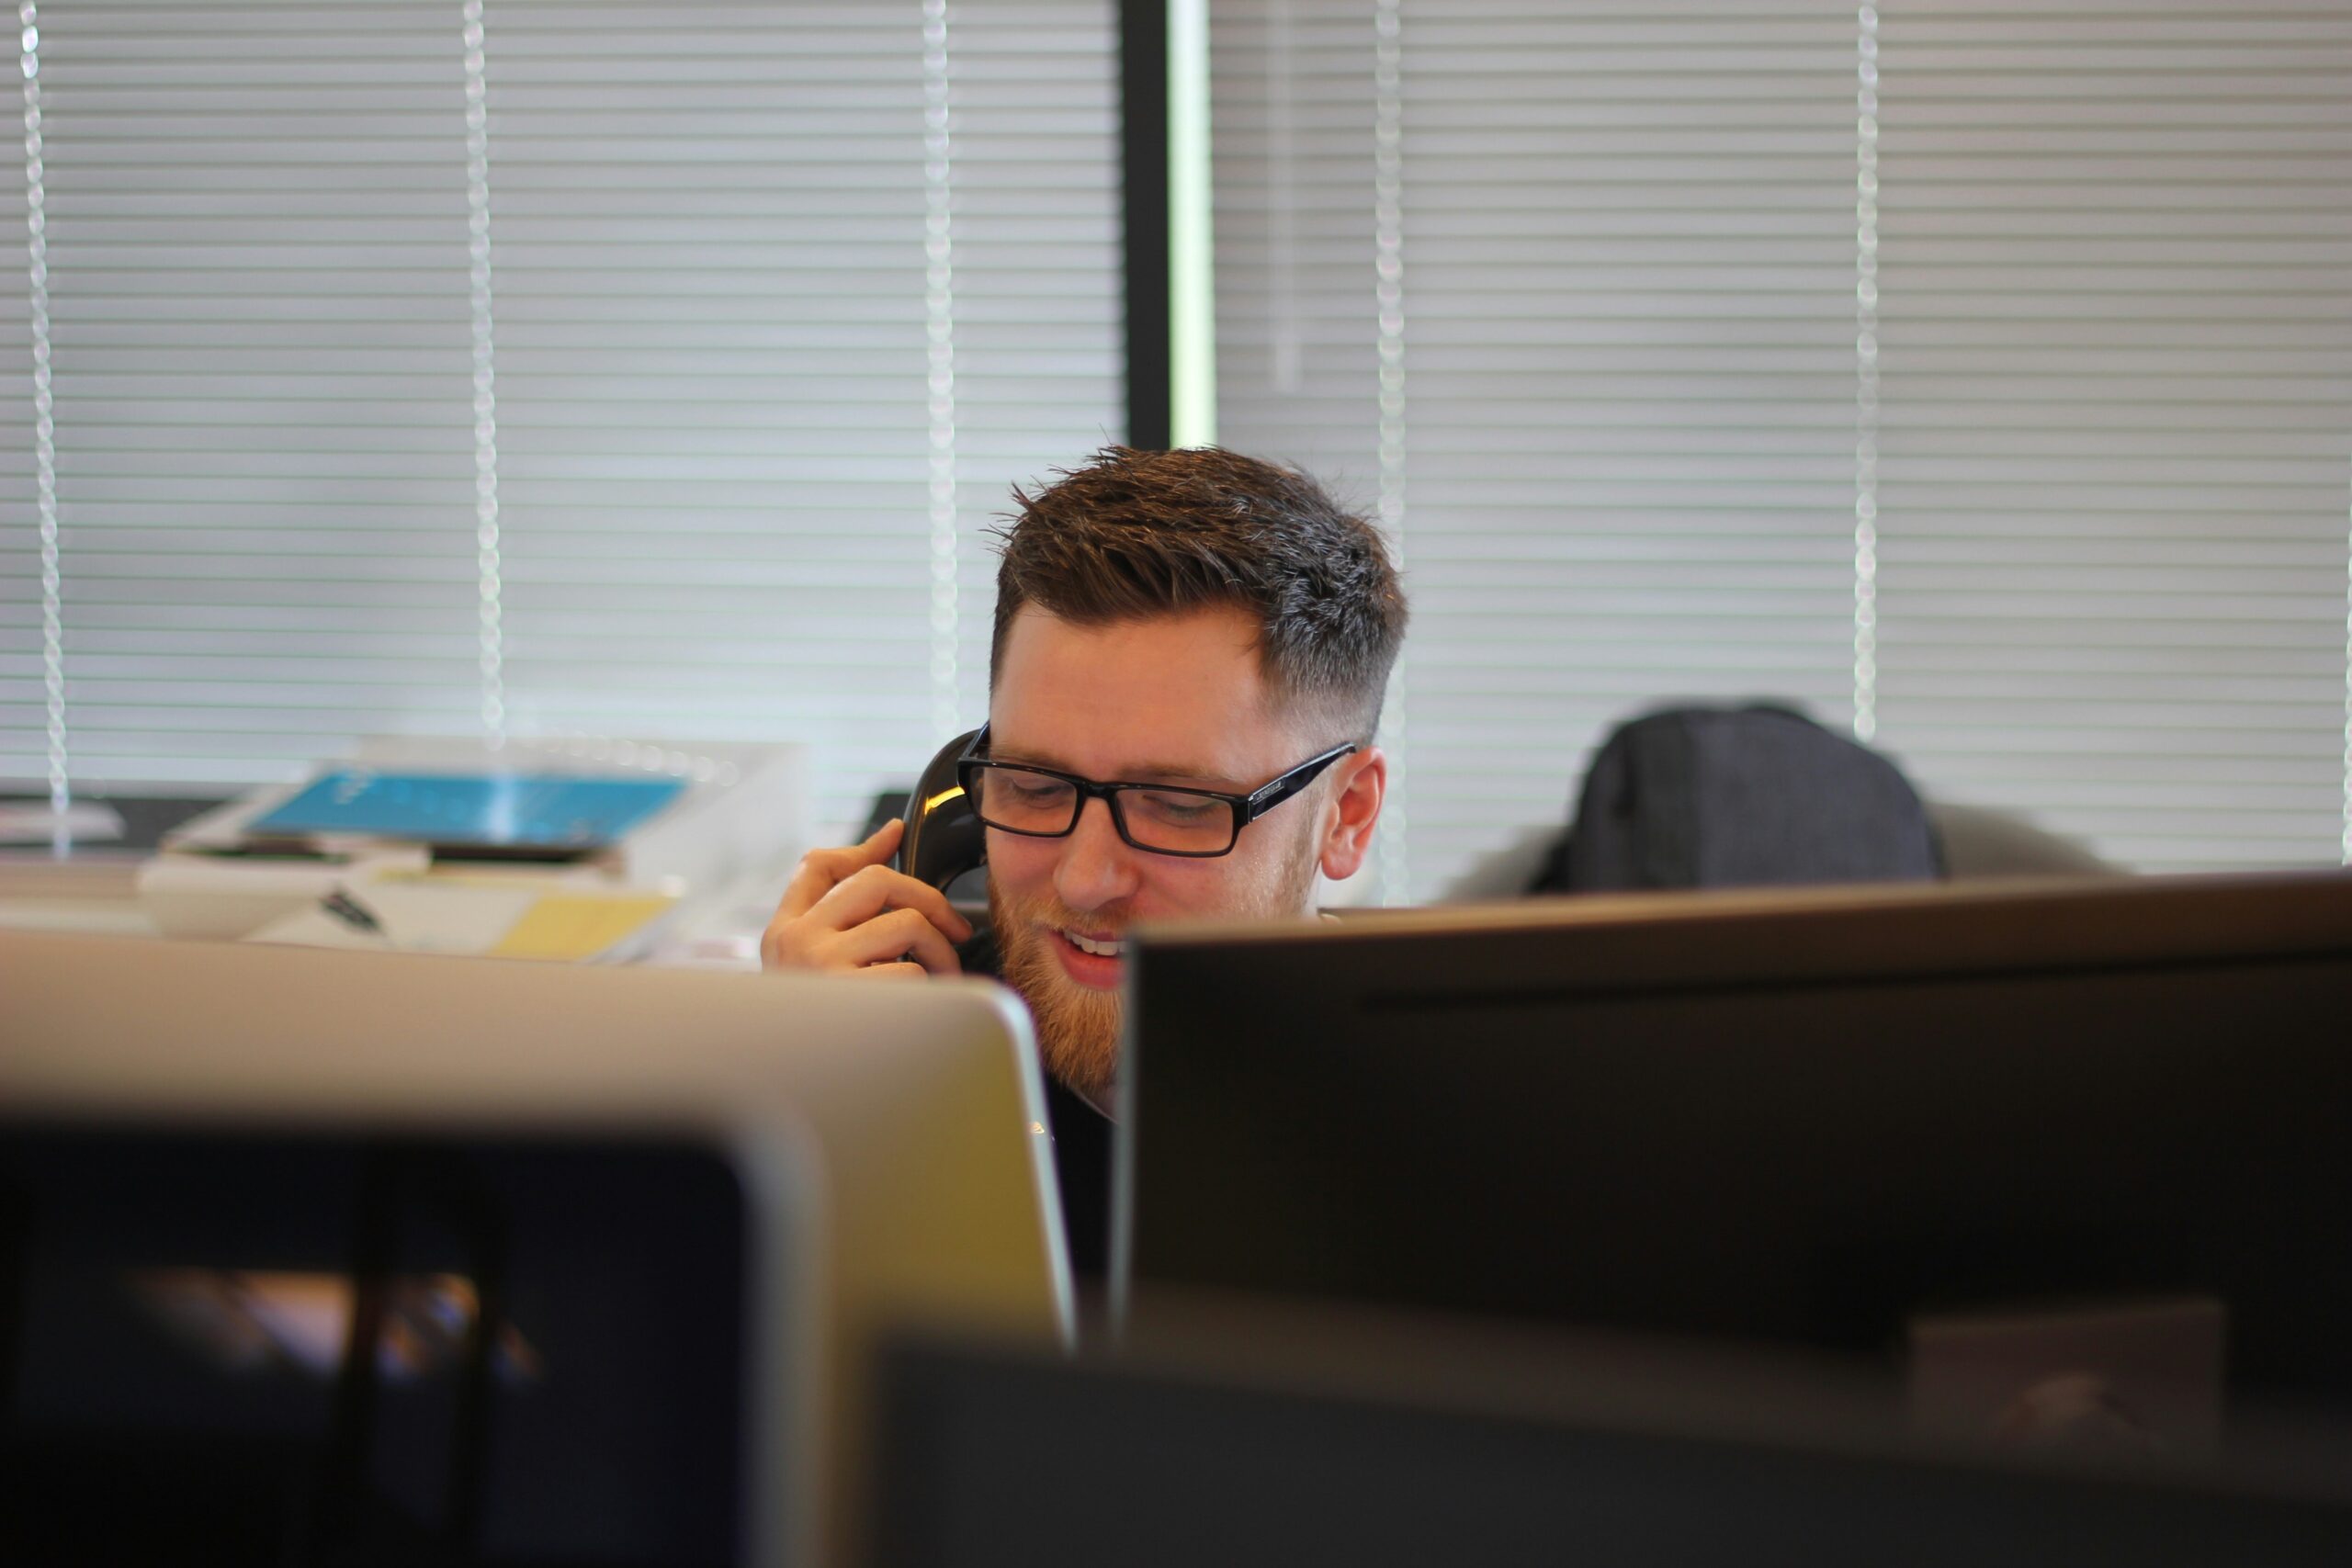 A person with glasses is sitting at a desk, talking on the phone in an office discussing examples of process automation.